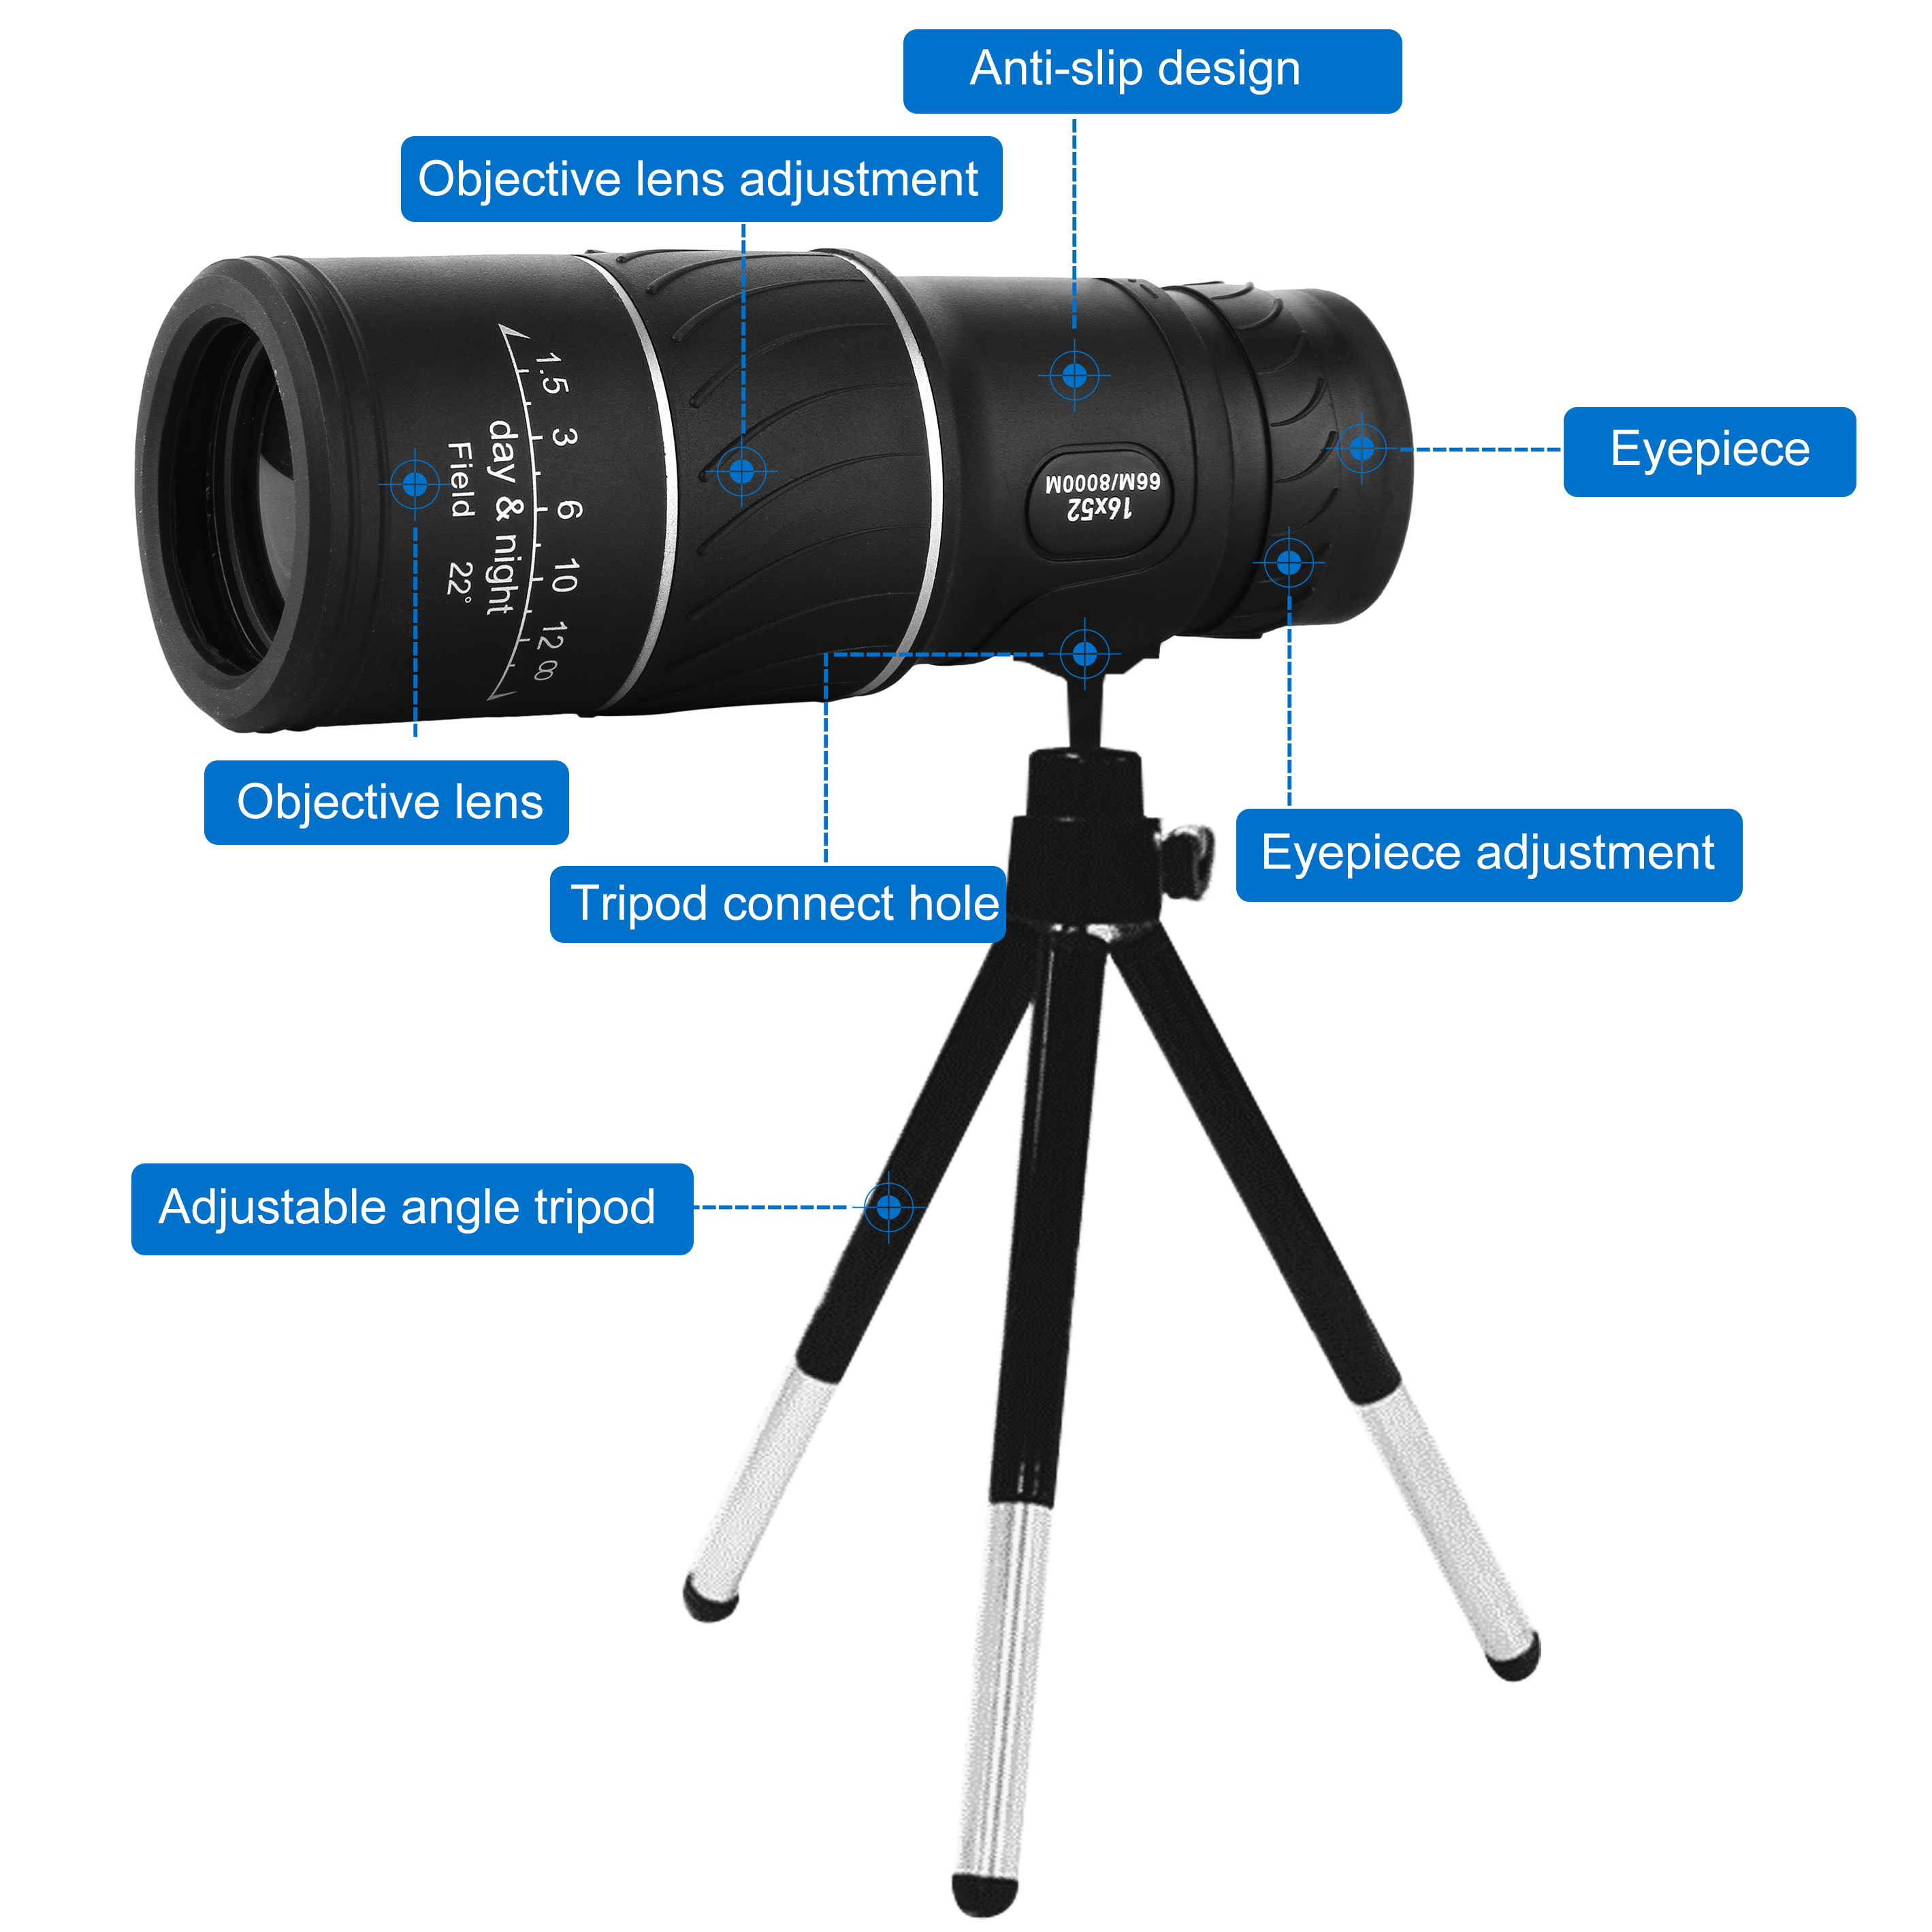 AOBETAK 16x52 Monocular Telescope, High Power Spotting Scopes Equipped With Phone Adaptor and Tripod, Low Light Night Vision Binoculars or Adults Kids Bird Watching Traveling, Outdoors 98m/ 8000m